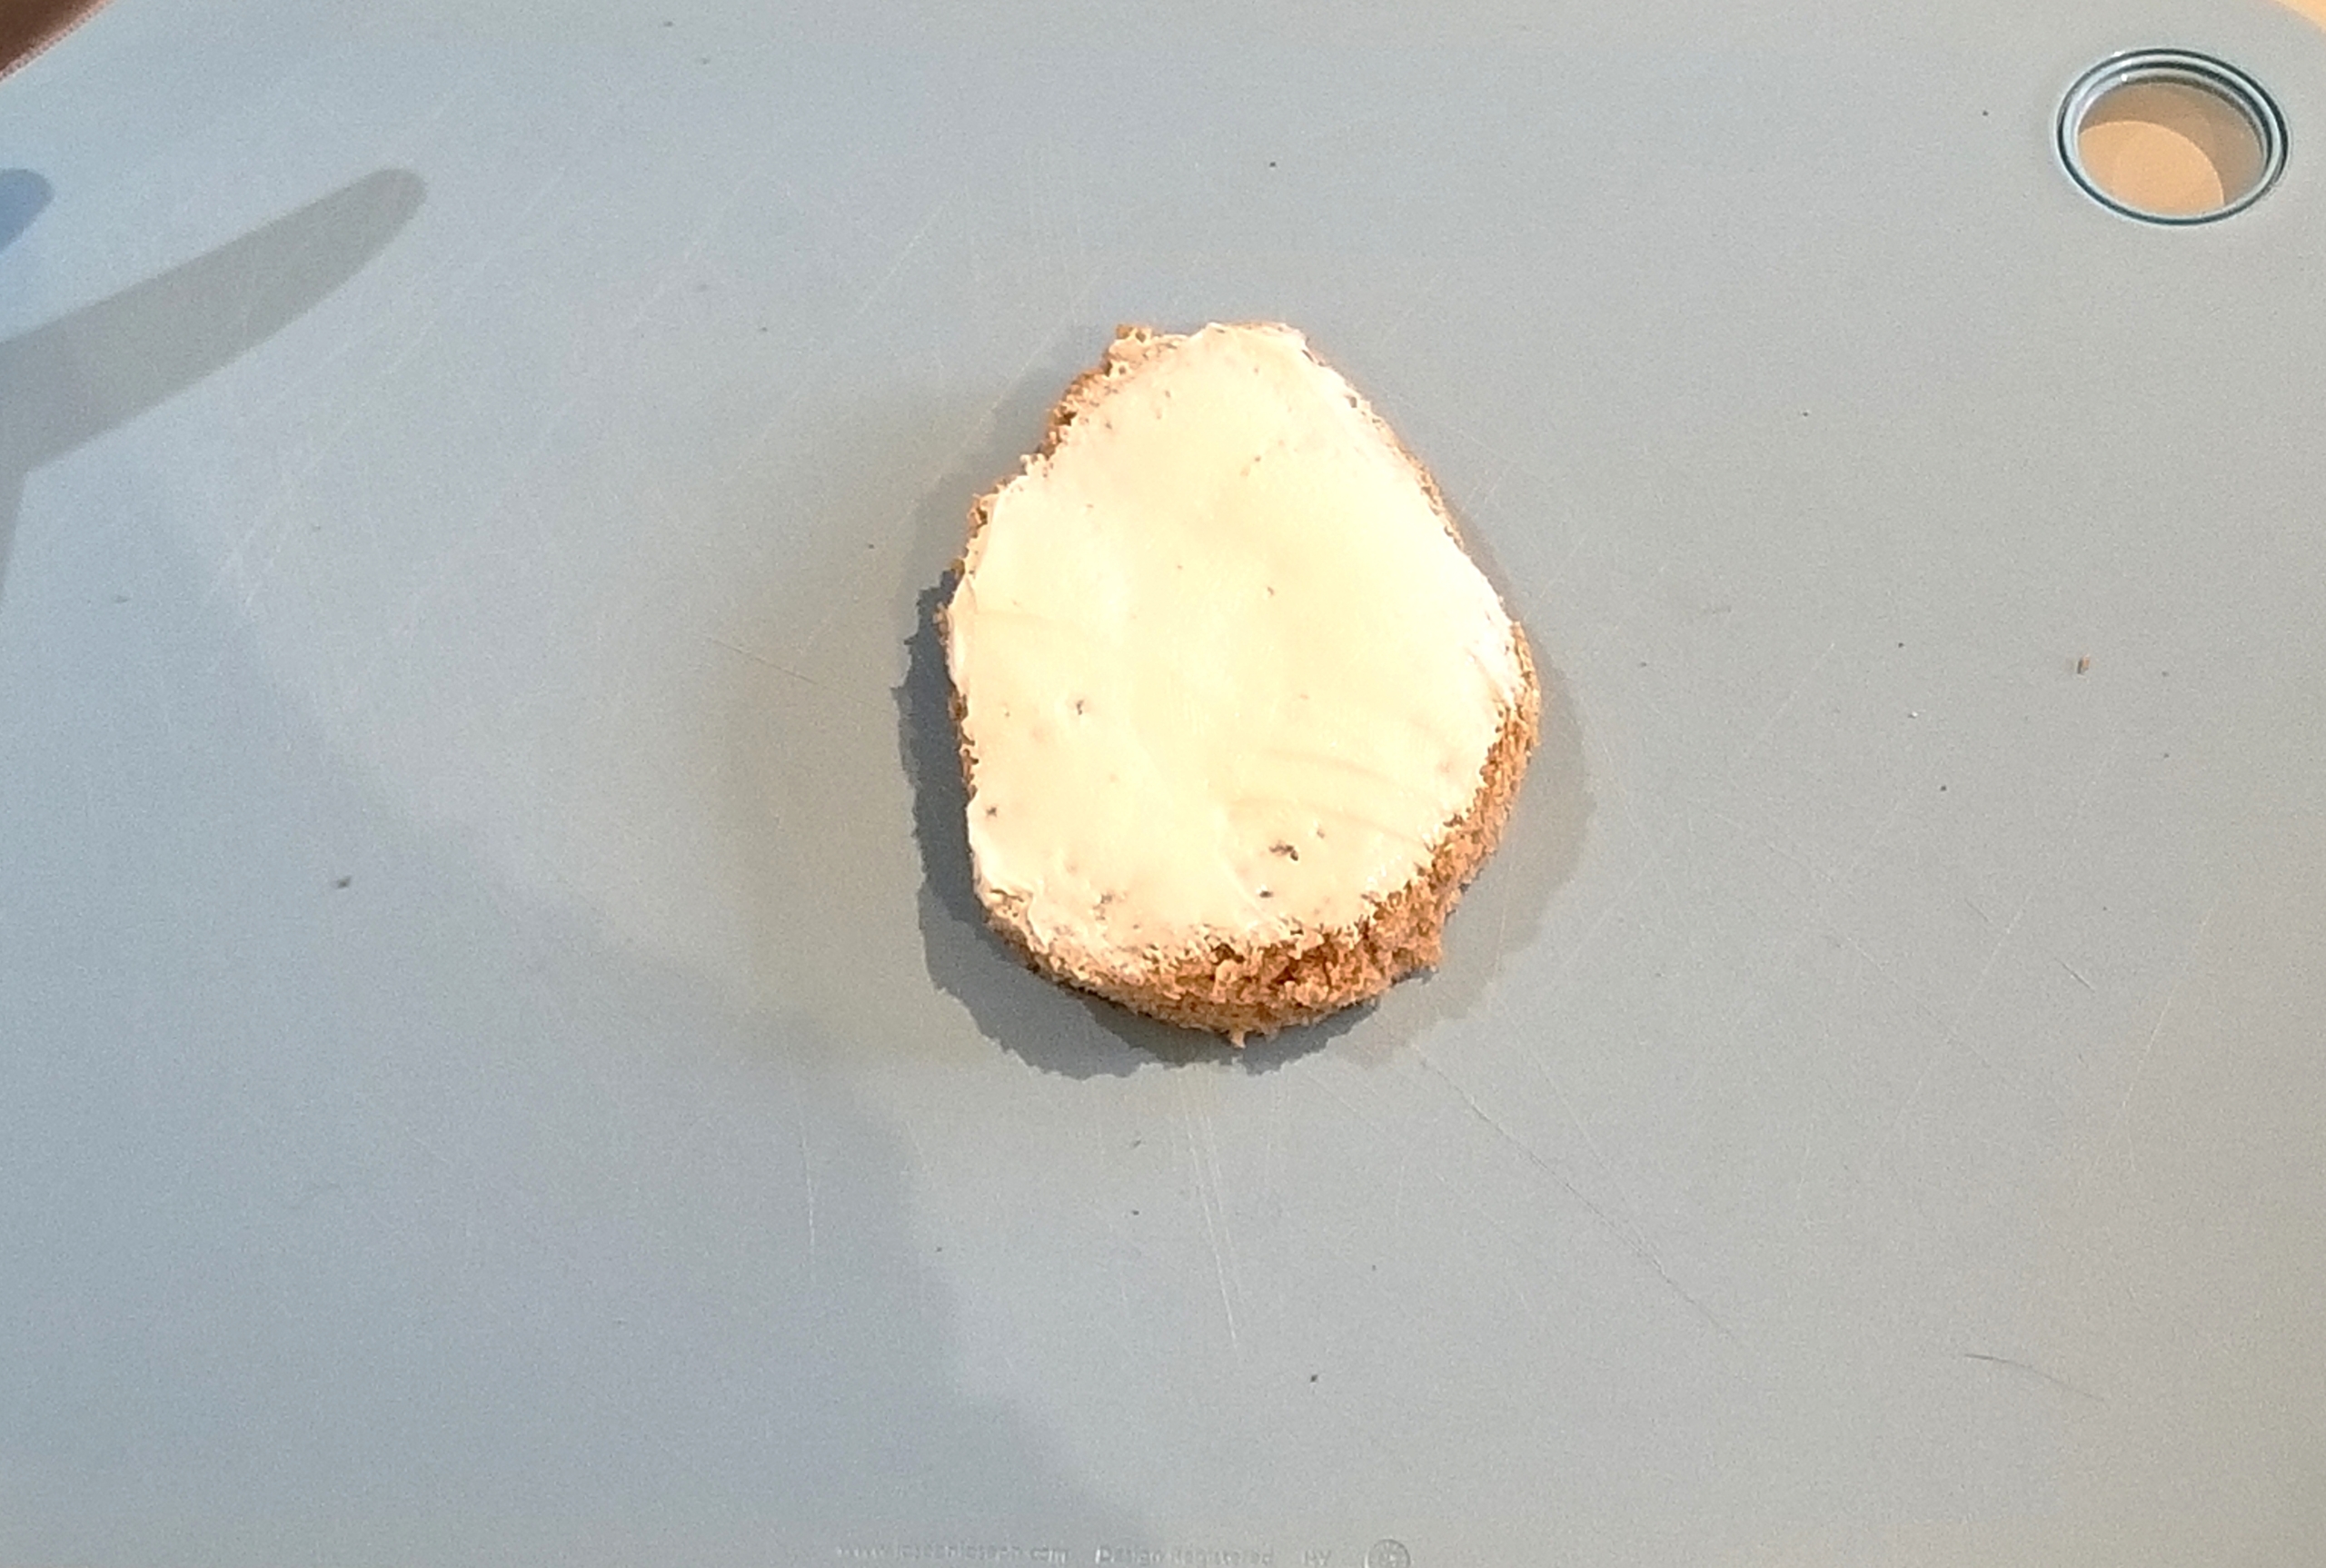 Easy Easter recipe step two - cream cheese spread onto piece of bread